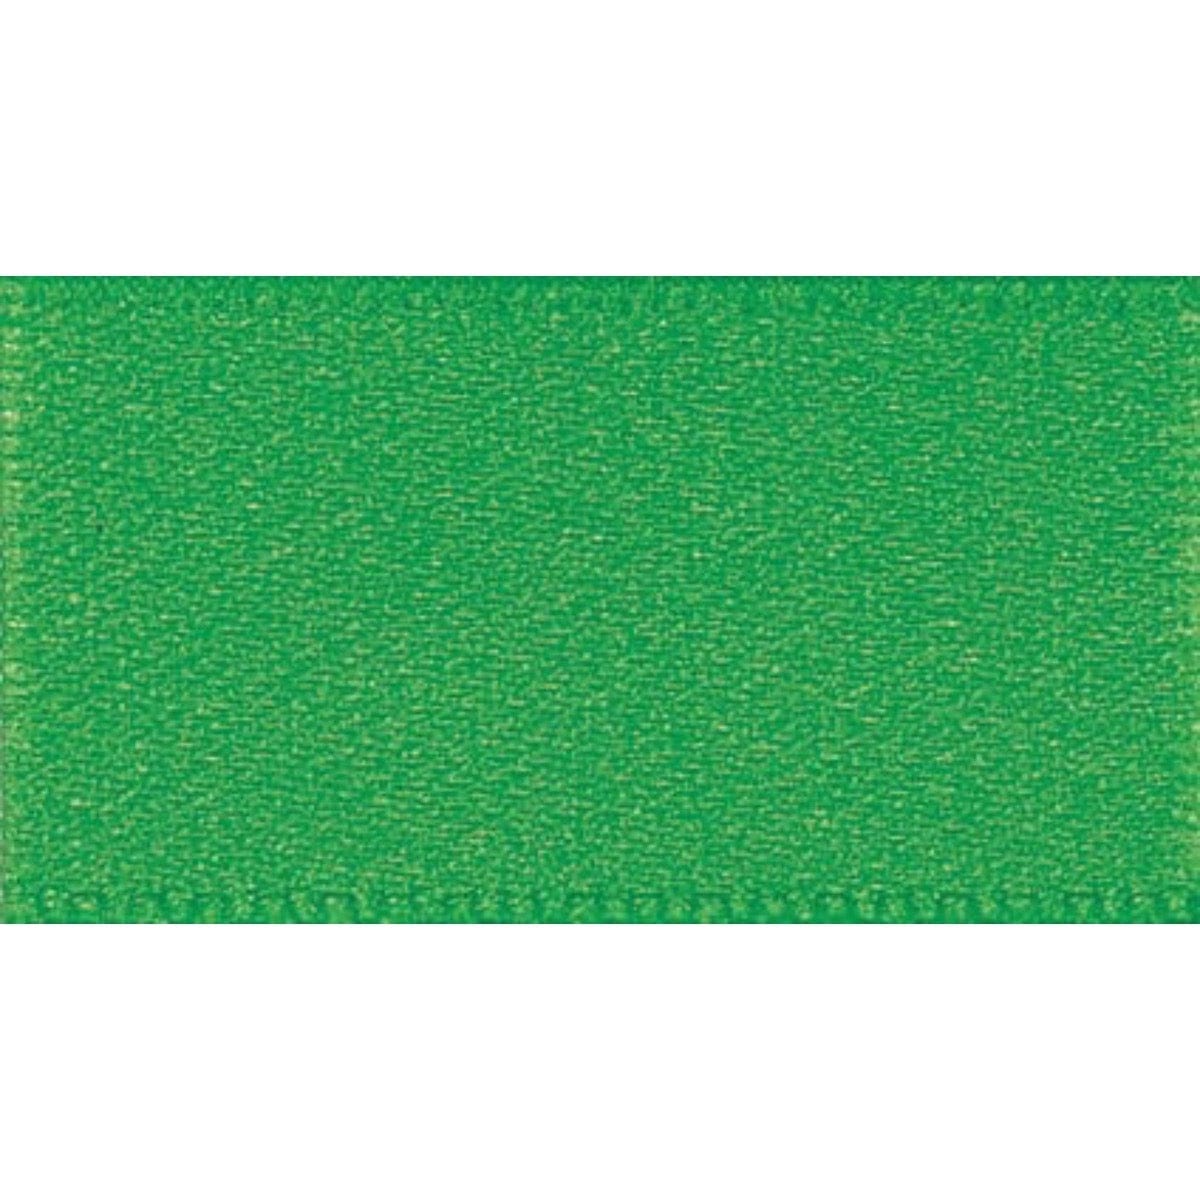 Double Faced Satin Ribbon Emerald Green: 15mm wide. Price per metre.